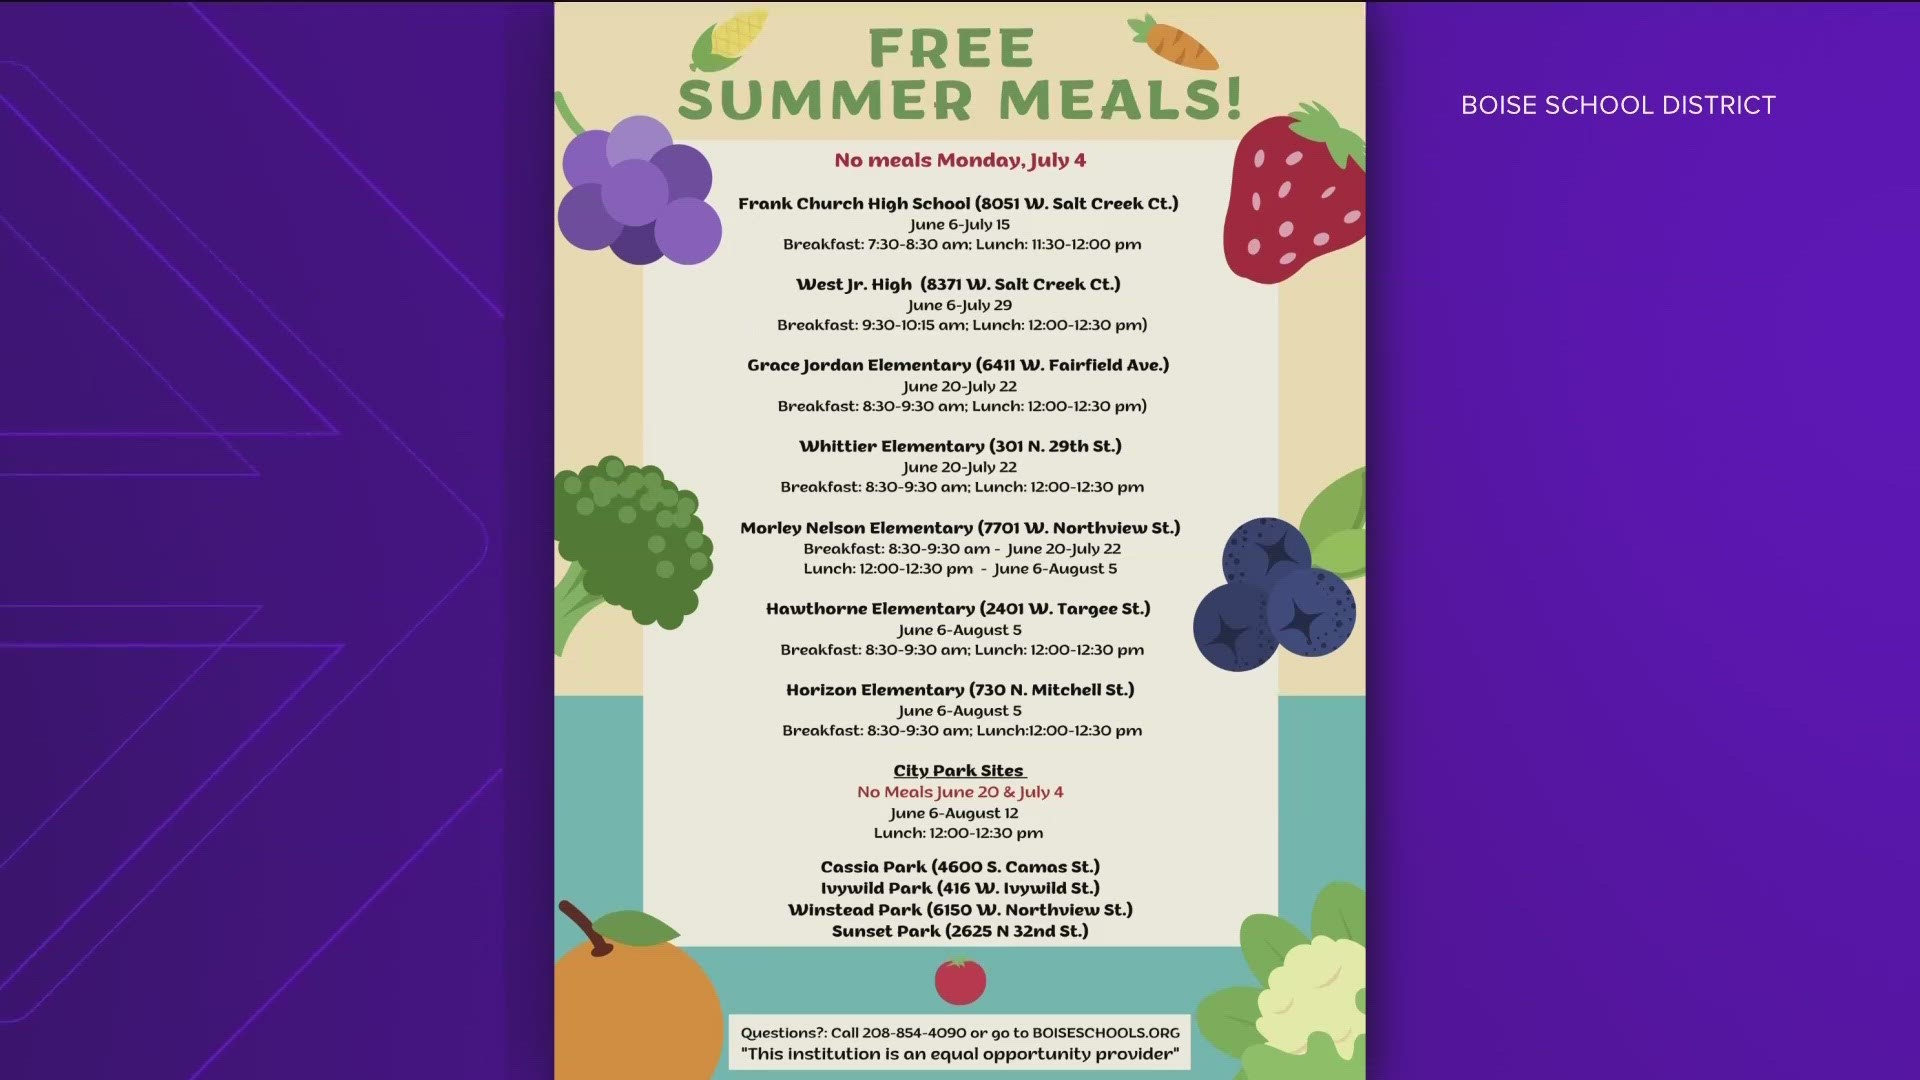 KTVB has compiled a list of school districts providing free meals throughout the Treasure Valley this summer, with dates, times and locations included.